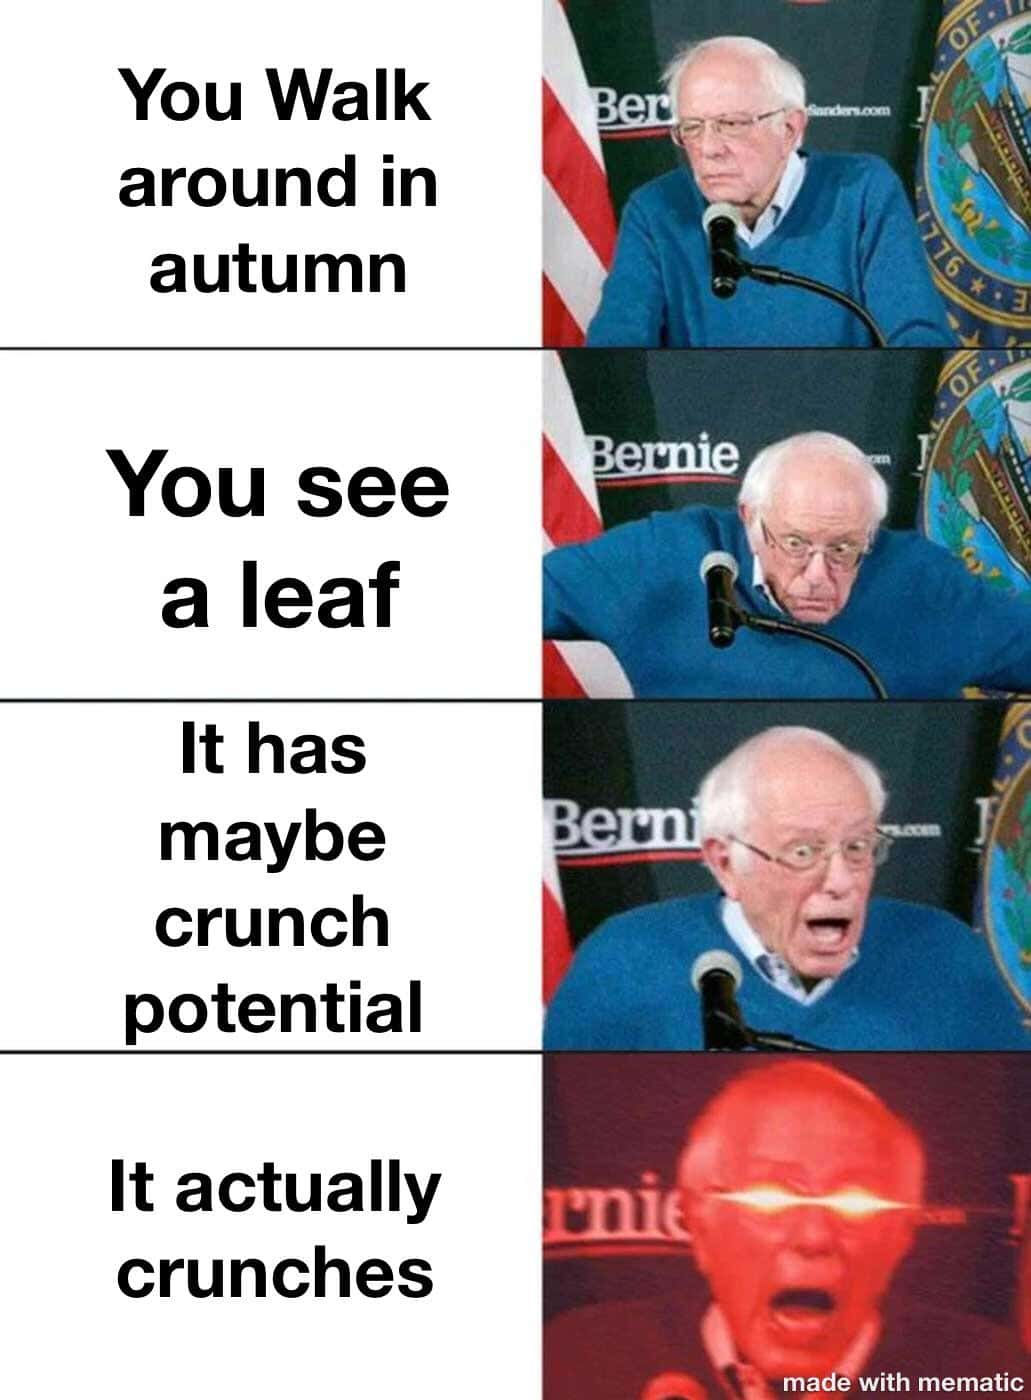 Dank, Visit, OC, Negative, JPEG, Feedback other memes Dank, Visit, OC, Negative, JPEG, Feedback text: You Walk around in autumn You a leaf It has maybe crunch potential It actually crunches made with mematic 